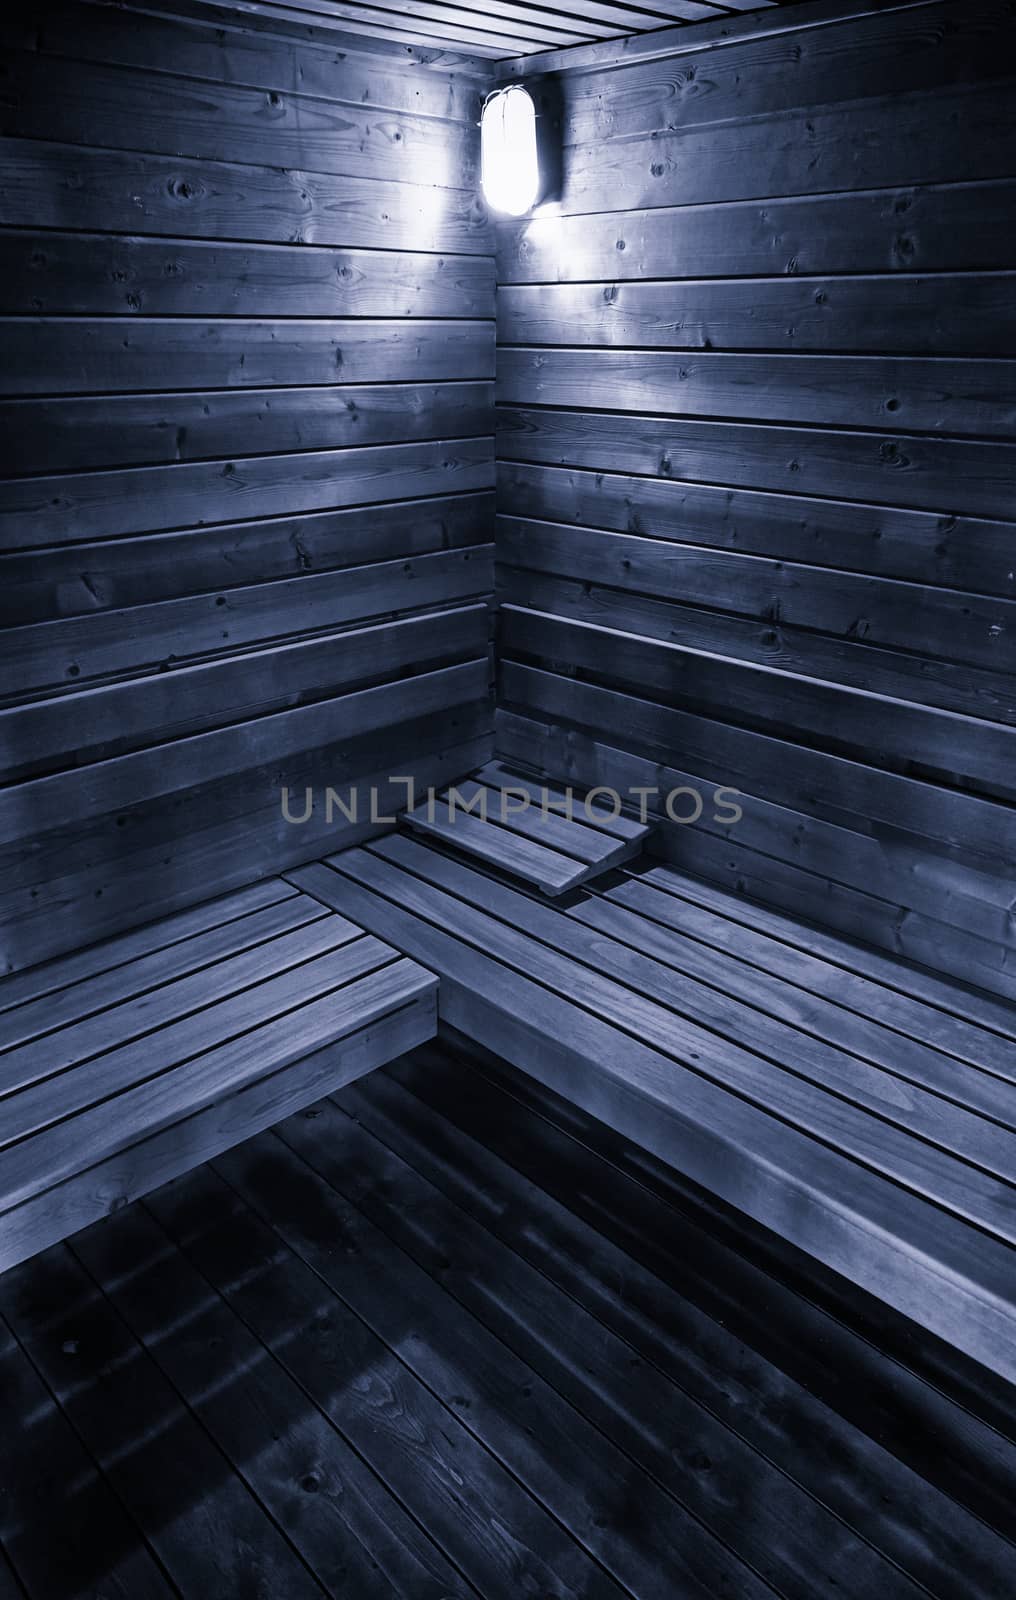 Wooden sauna, detail of a sauna at a spa relaxation, health and care